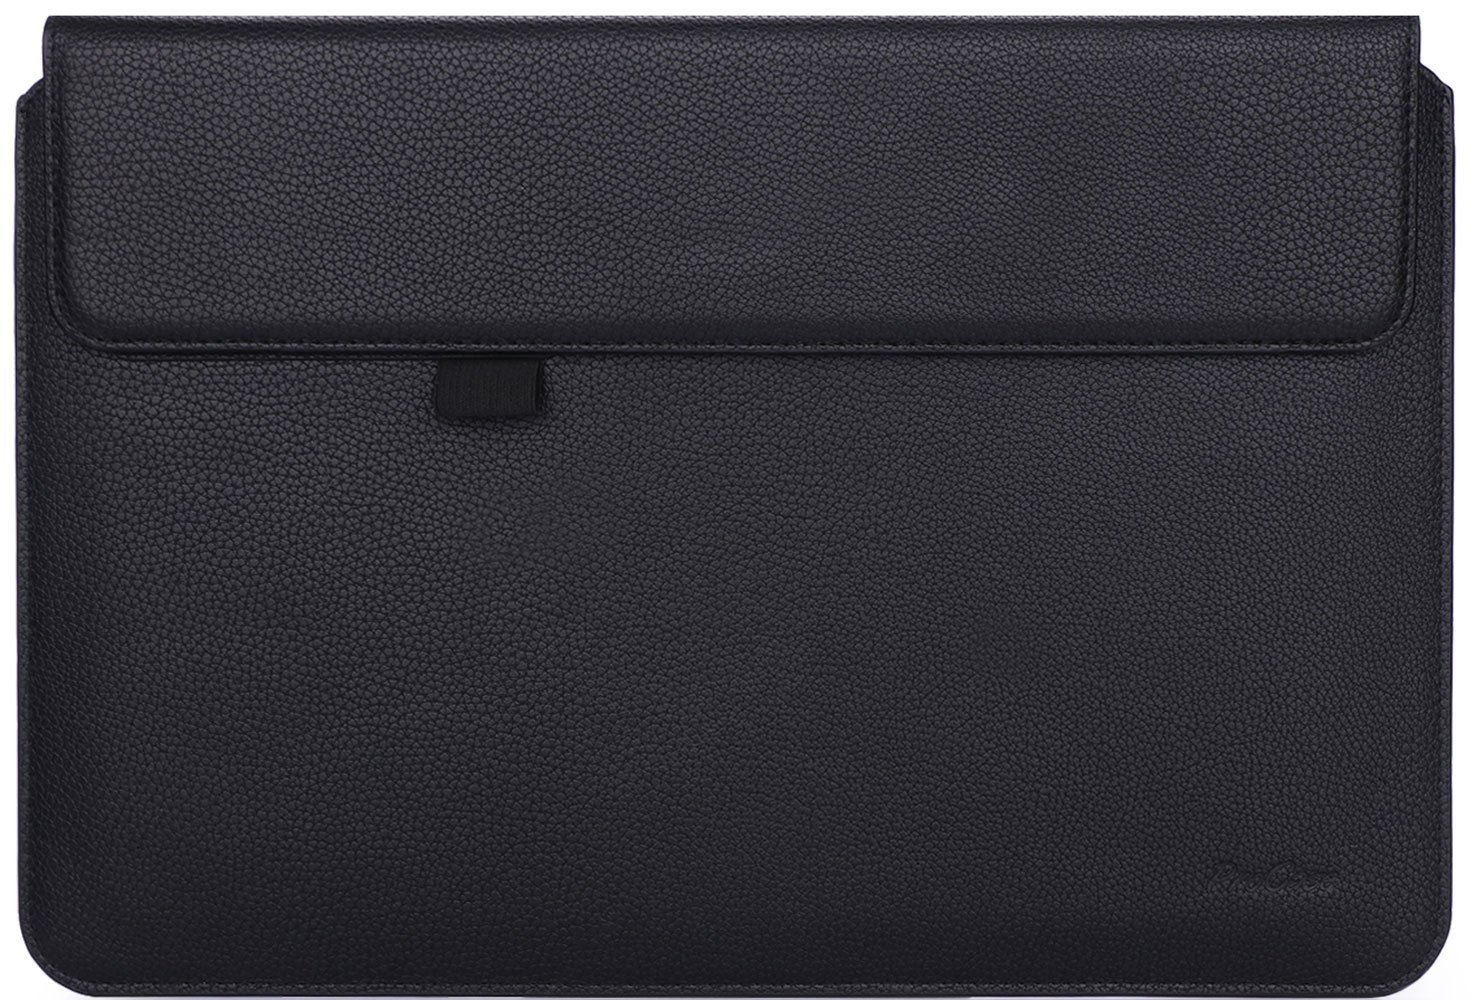 PROCASE SURFACE PRO CASE / SURFACE PRO 4 3 SLEEVE CASE, 12 INCH SLEEVE BAG LAPTOP TABLET PROTECTIVE COVER FOR NEW MICROSOFT SURFACE PRO 2017 / PRO 4 3, COMPATIBLE WITH TYPE COVER KEYBOARD - BLACK